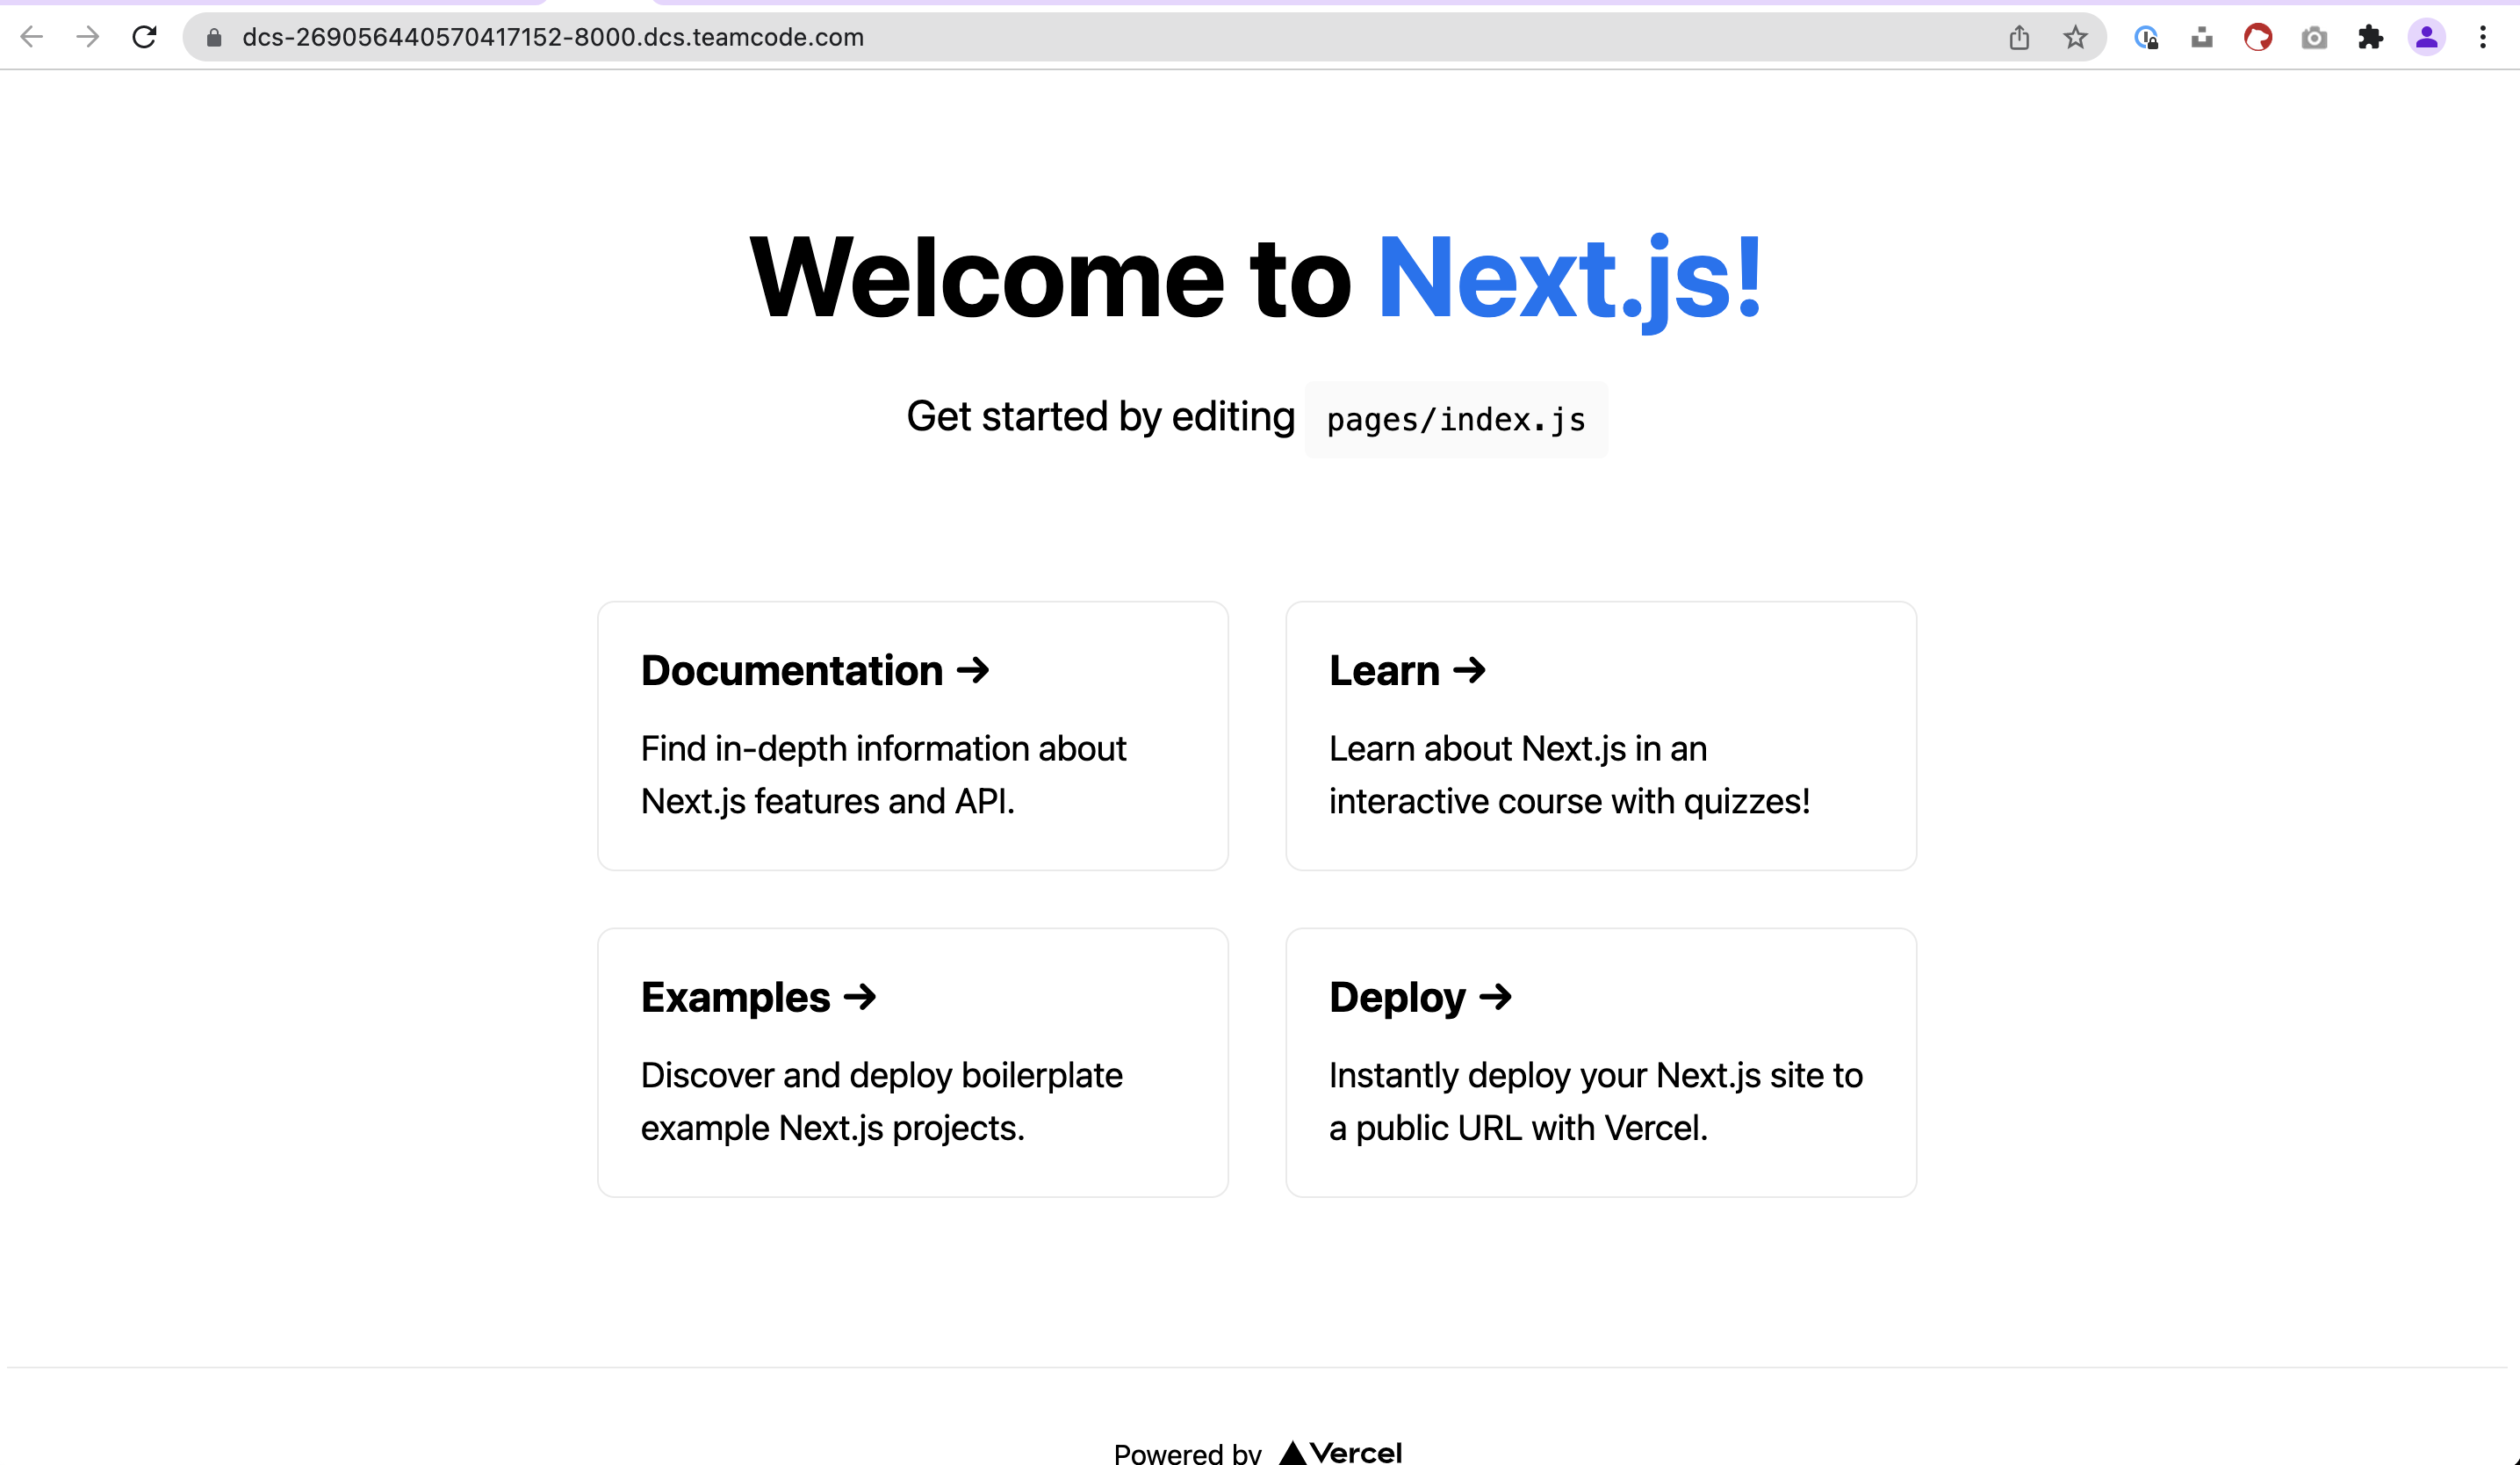 Welcome page of Next.js 